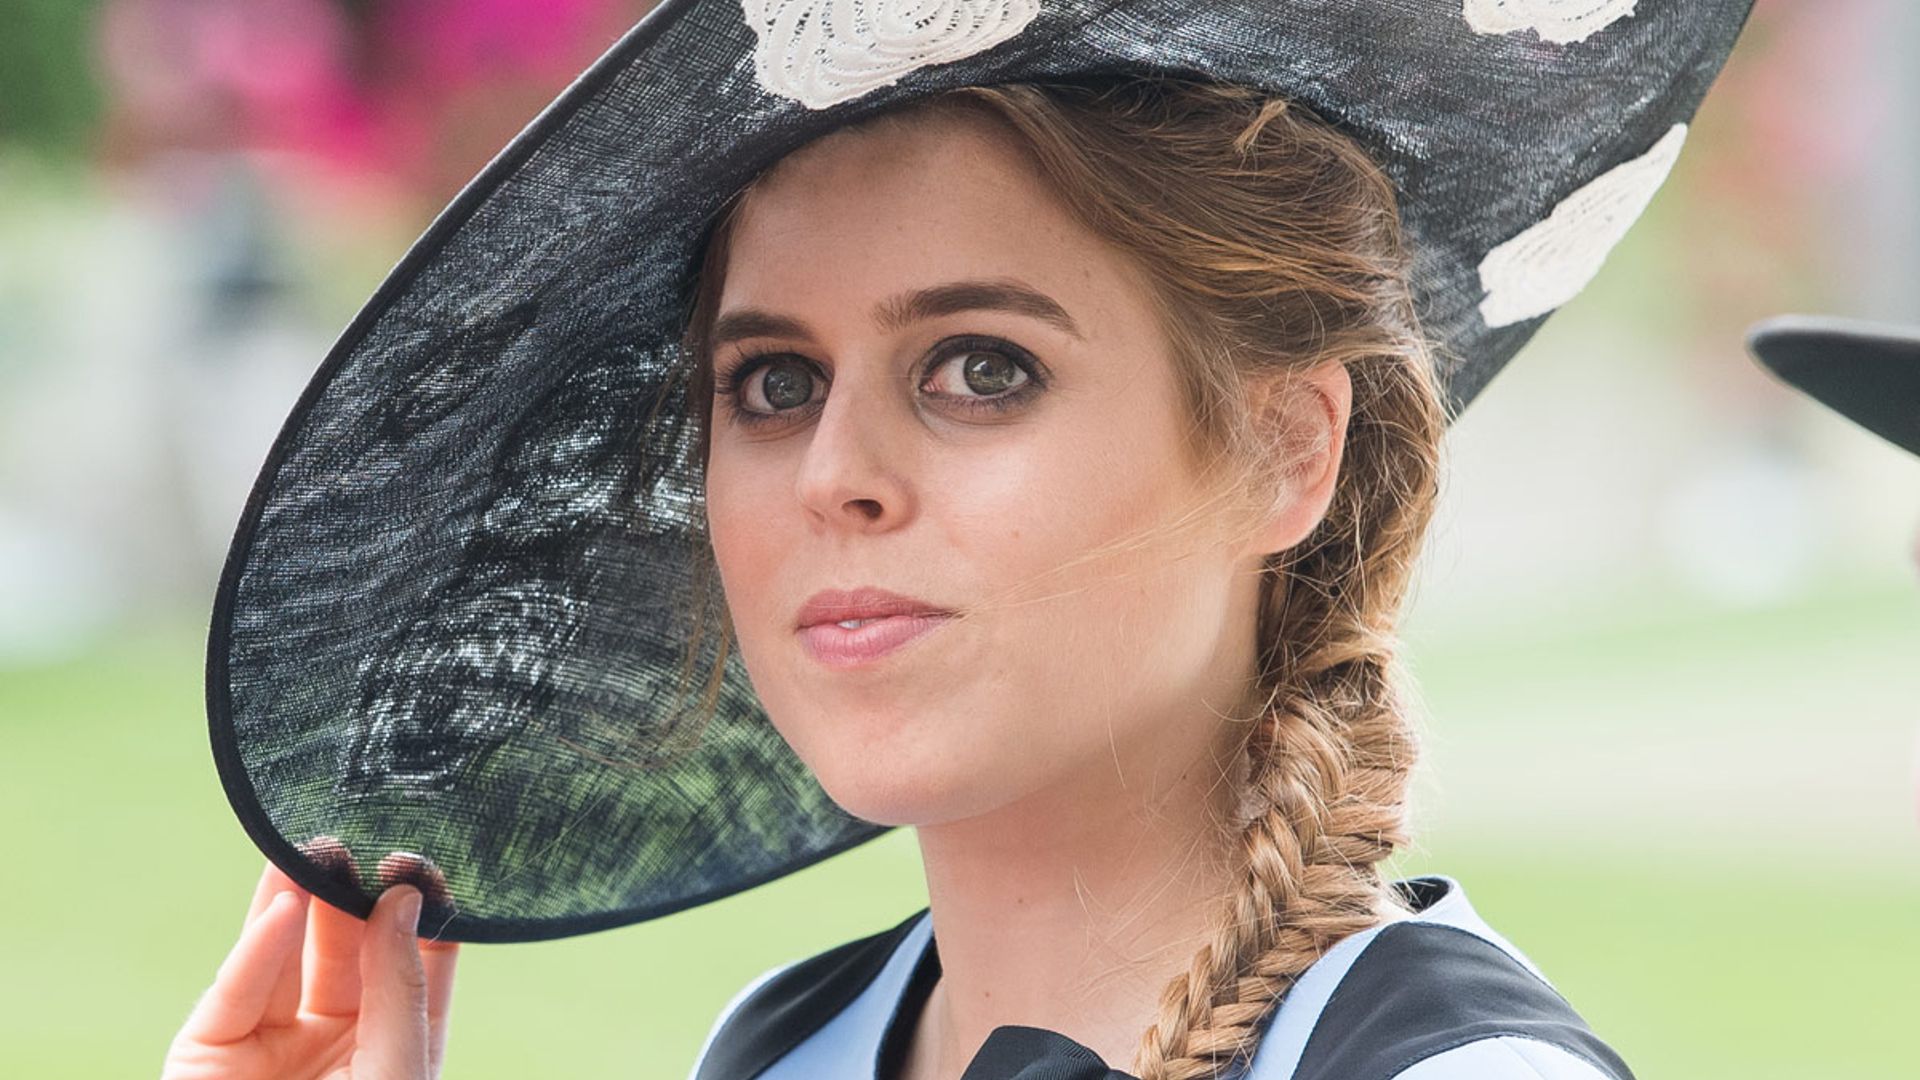 The one flower Princess Beatrice will definitely have in her wedding bouquet